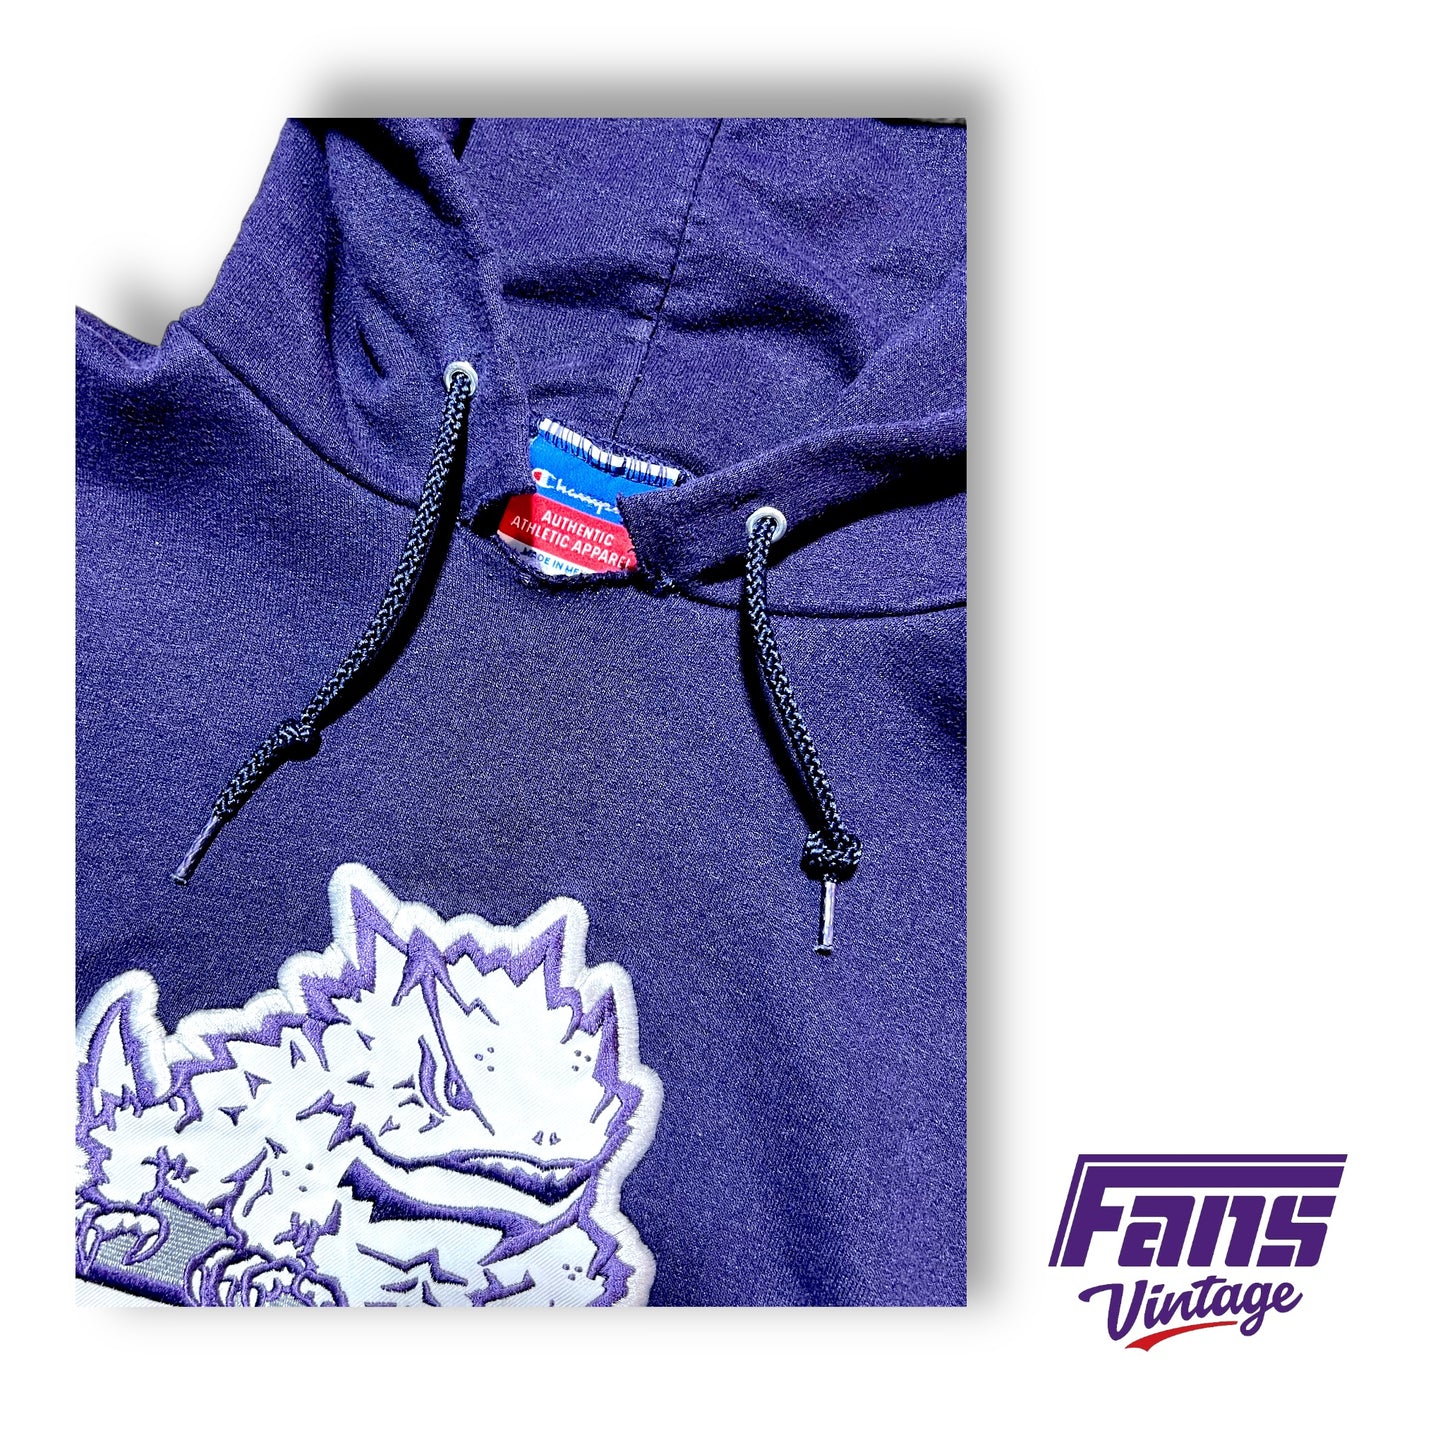 Y2K Vintage TCU Hoodie Sweater - Champion Brand with large embroidered logo